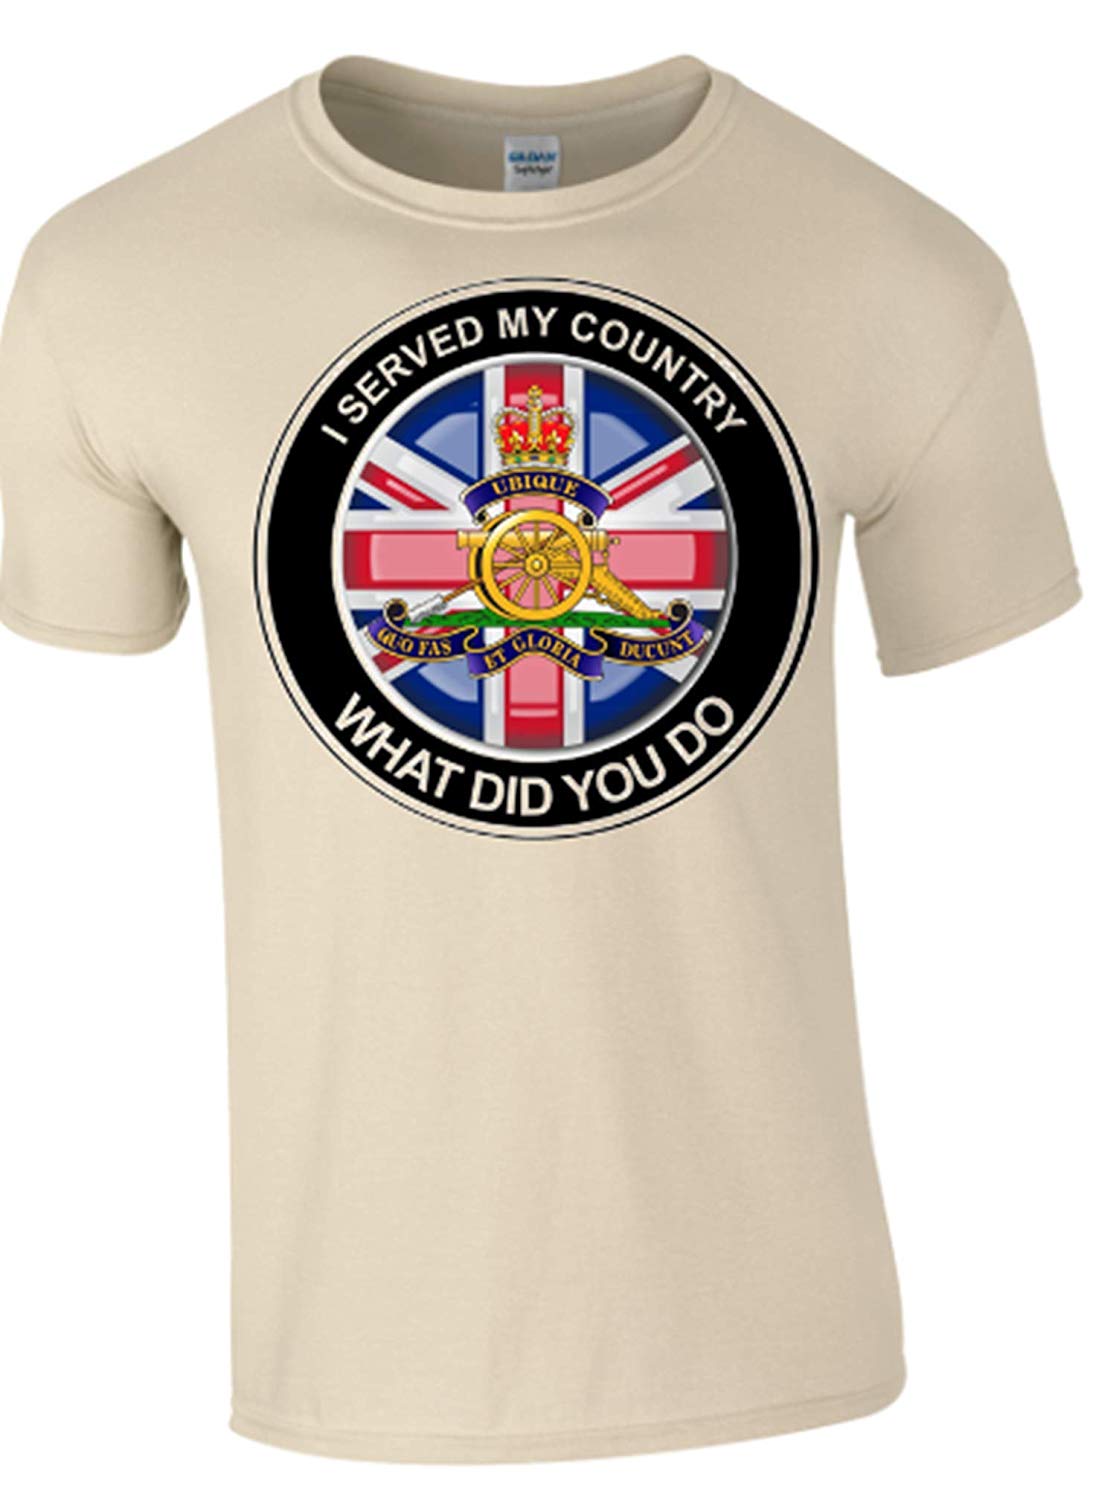 Royal Artillery What did You do T-Shirt - Army 1157 kit L Army 1157 Kit Veterans Owned Business